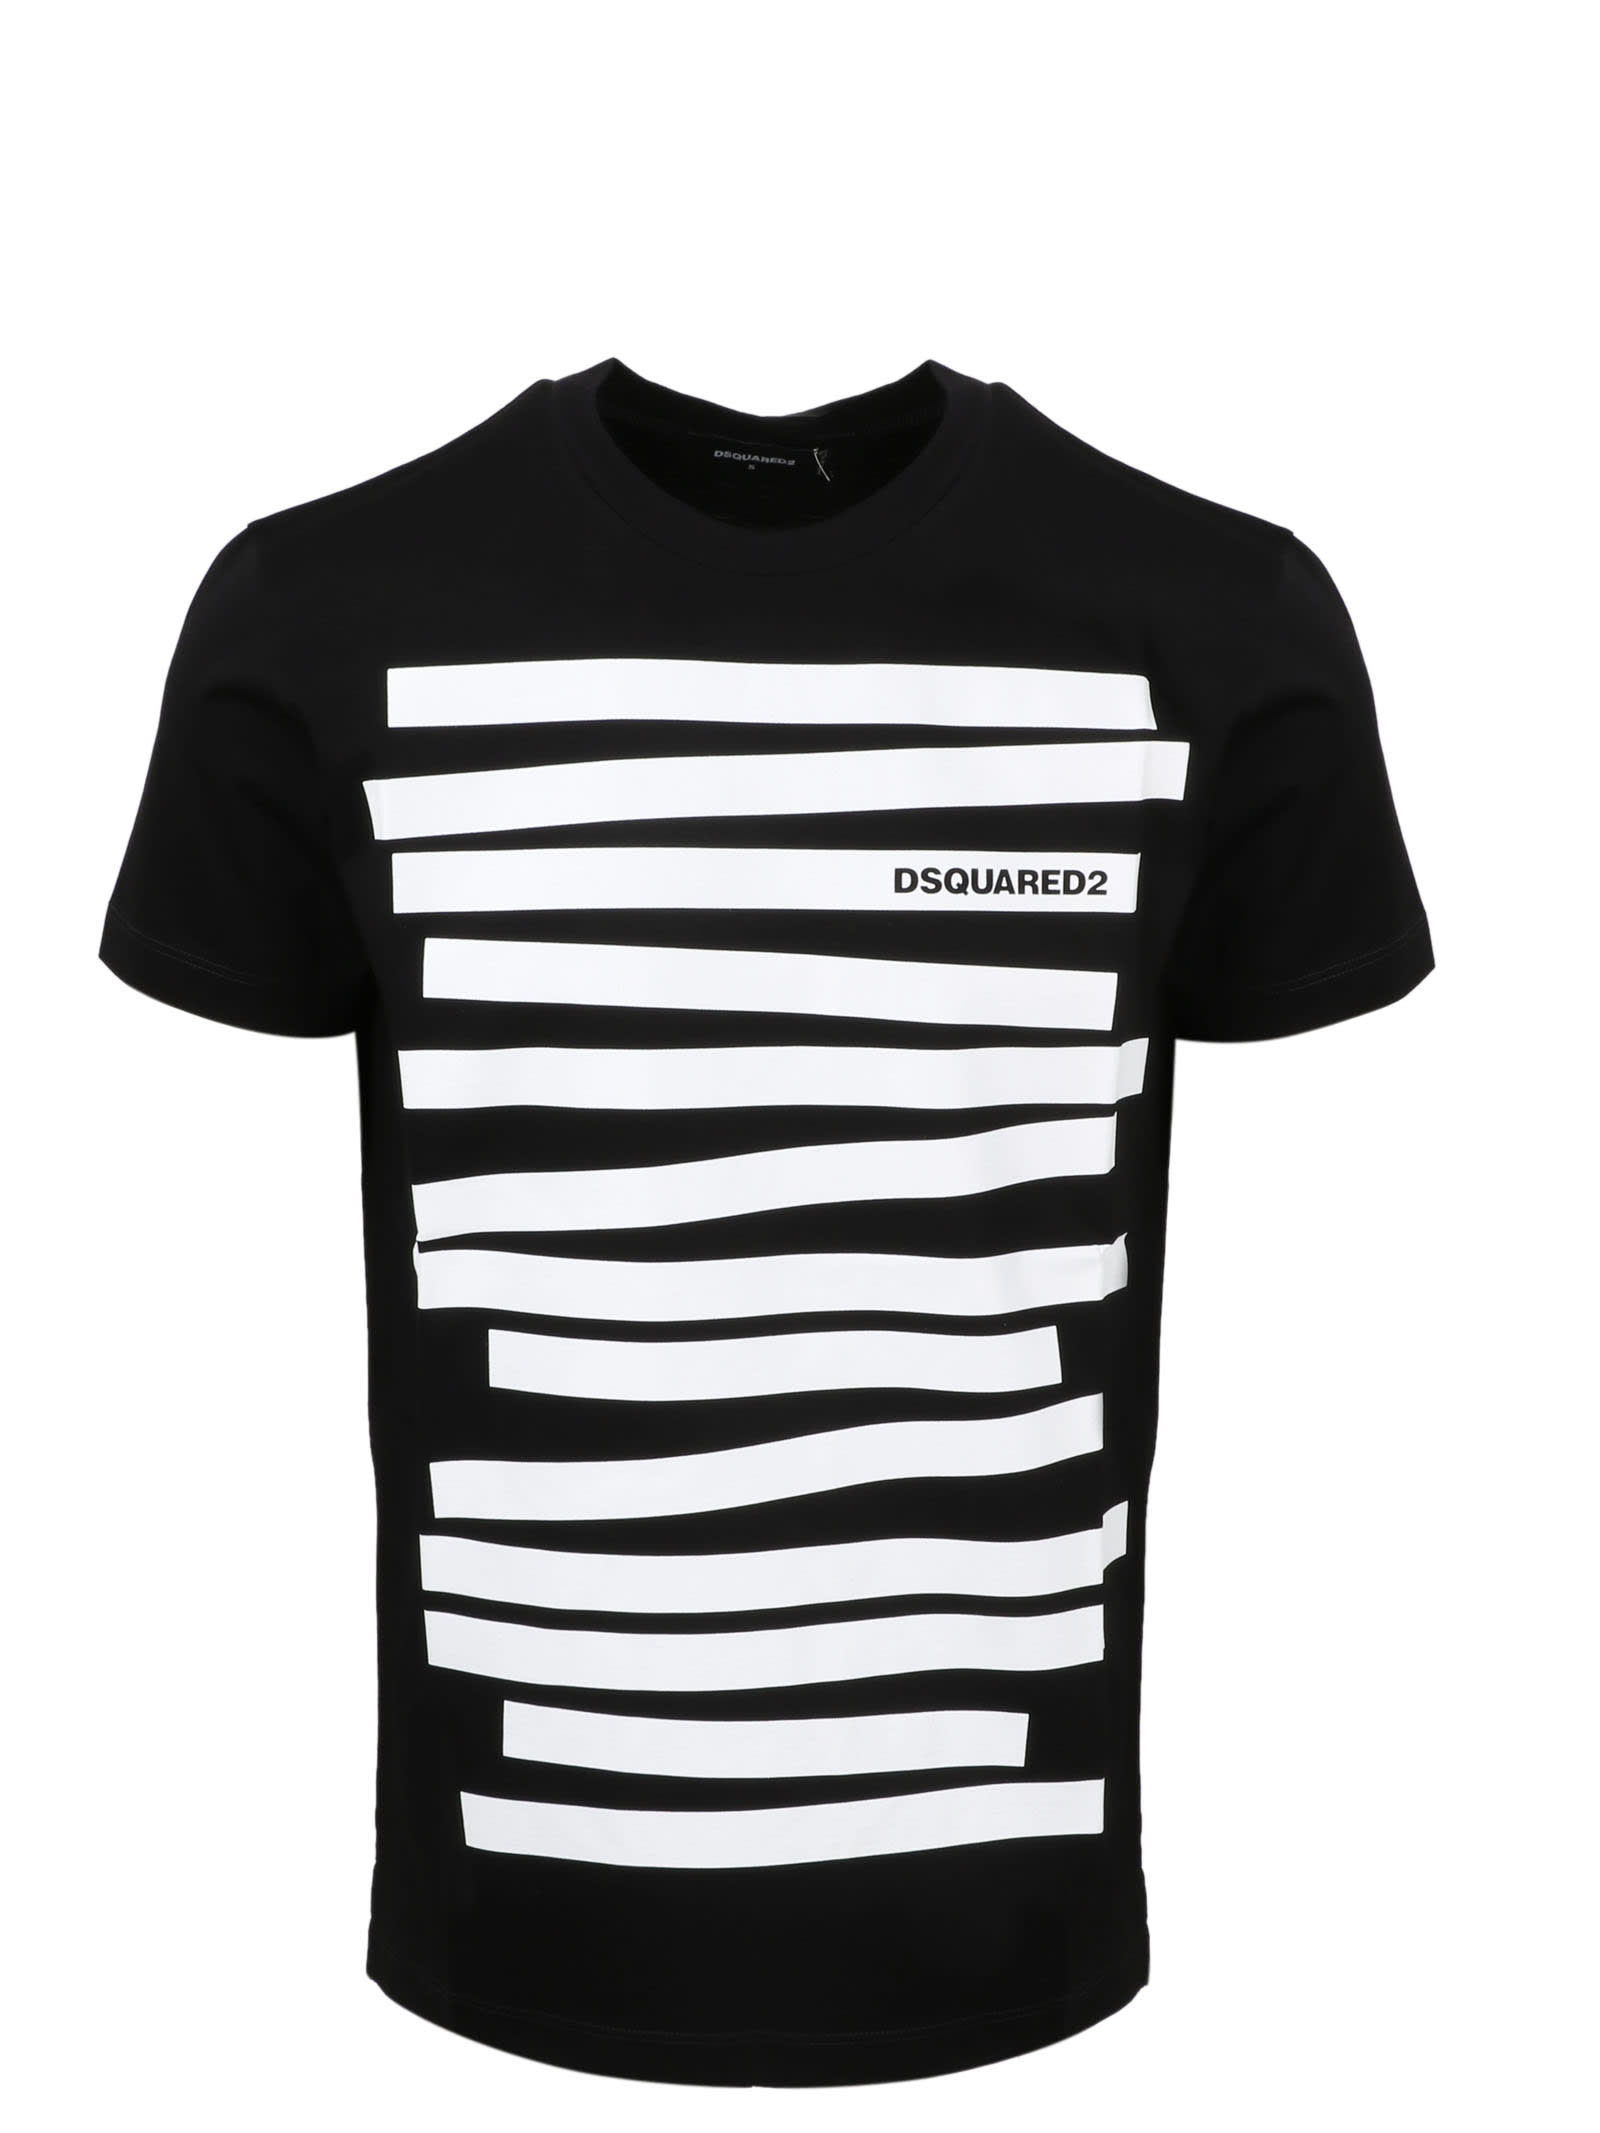 DSQUARED2 GLASSIFIED T-SHIRT,S71GD1011 S23009 900